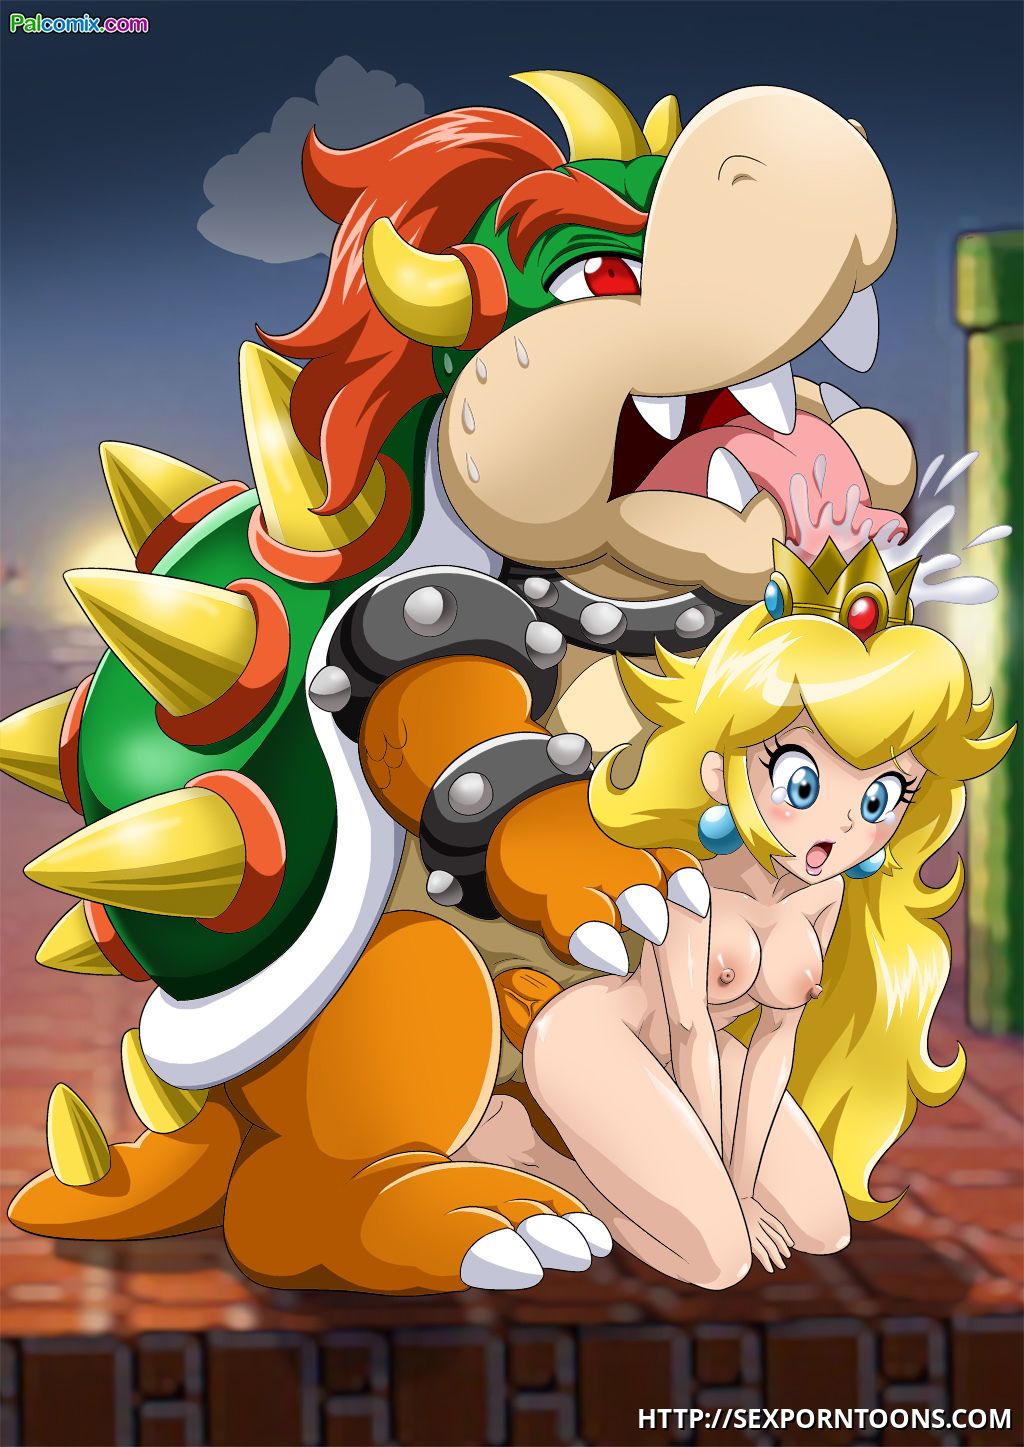 Phantom recomended Nude peach games fucked